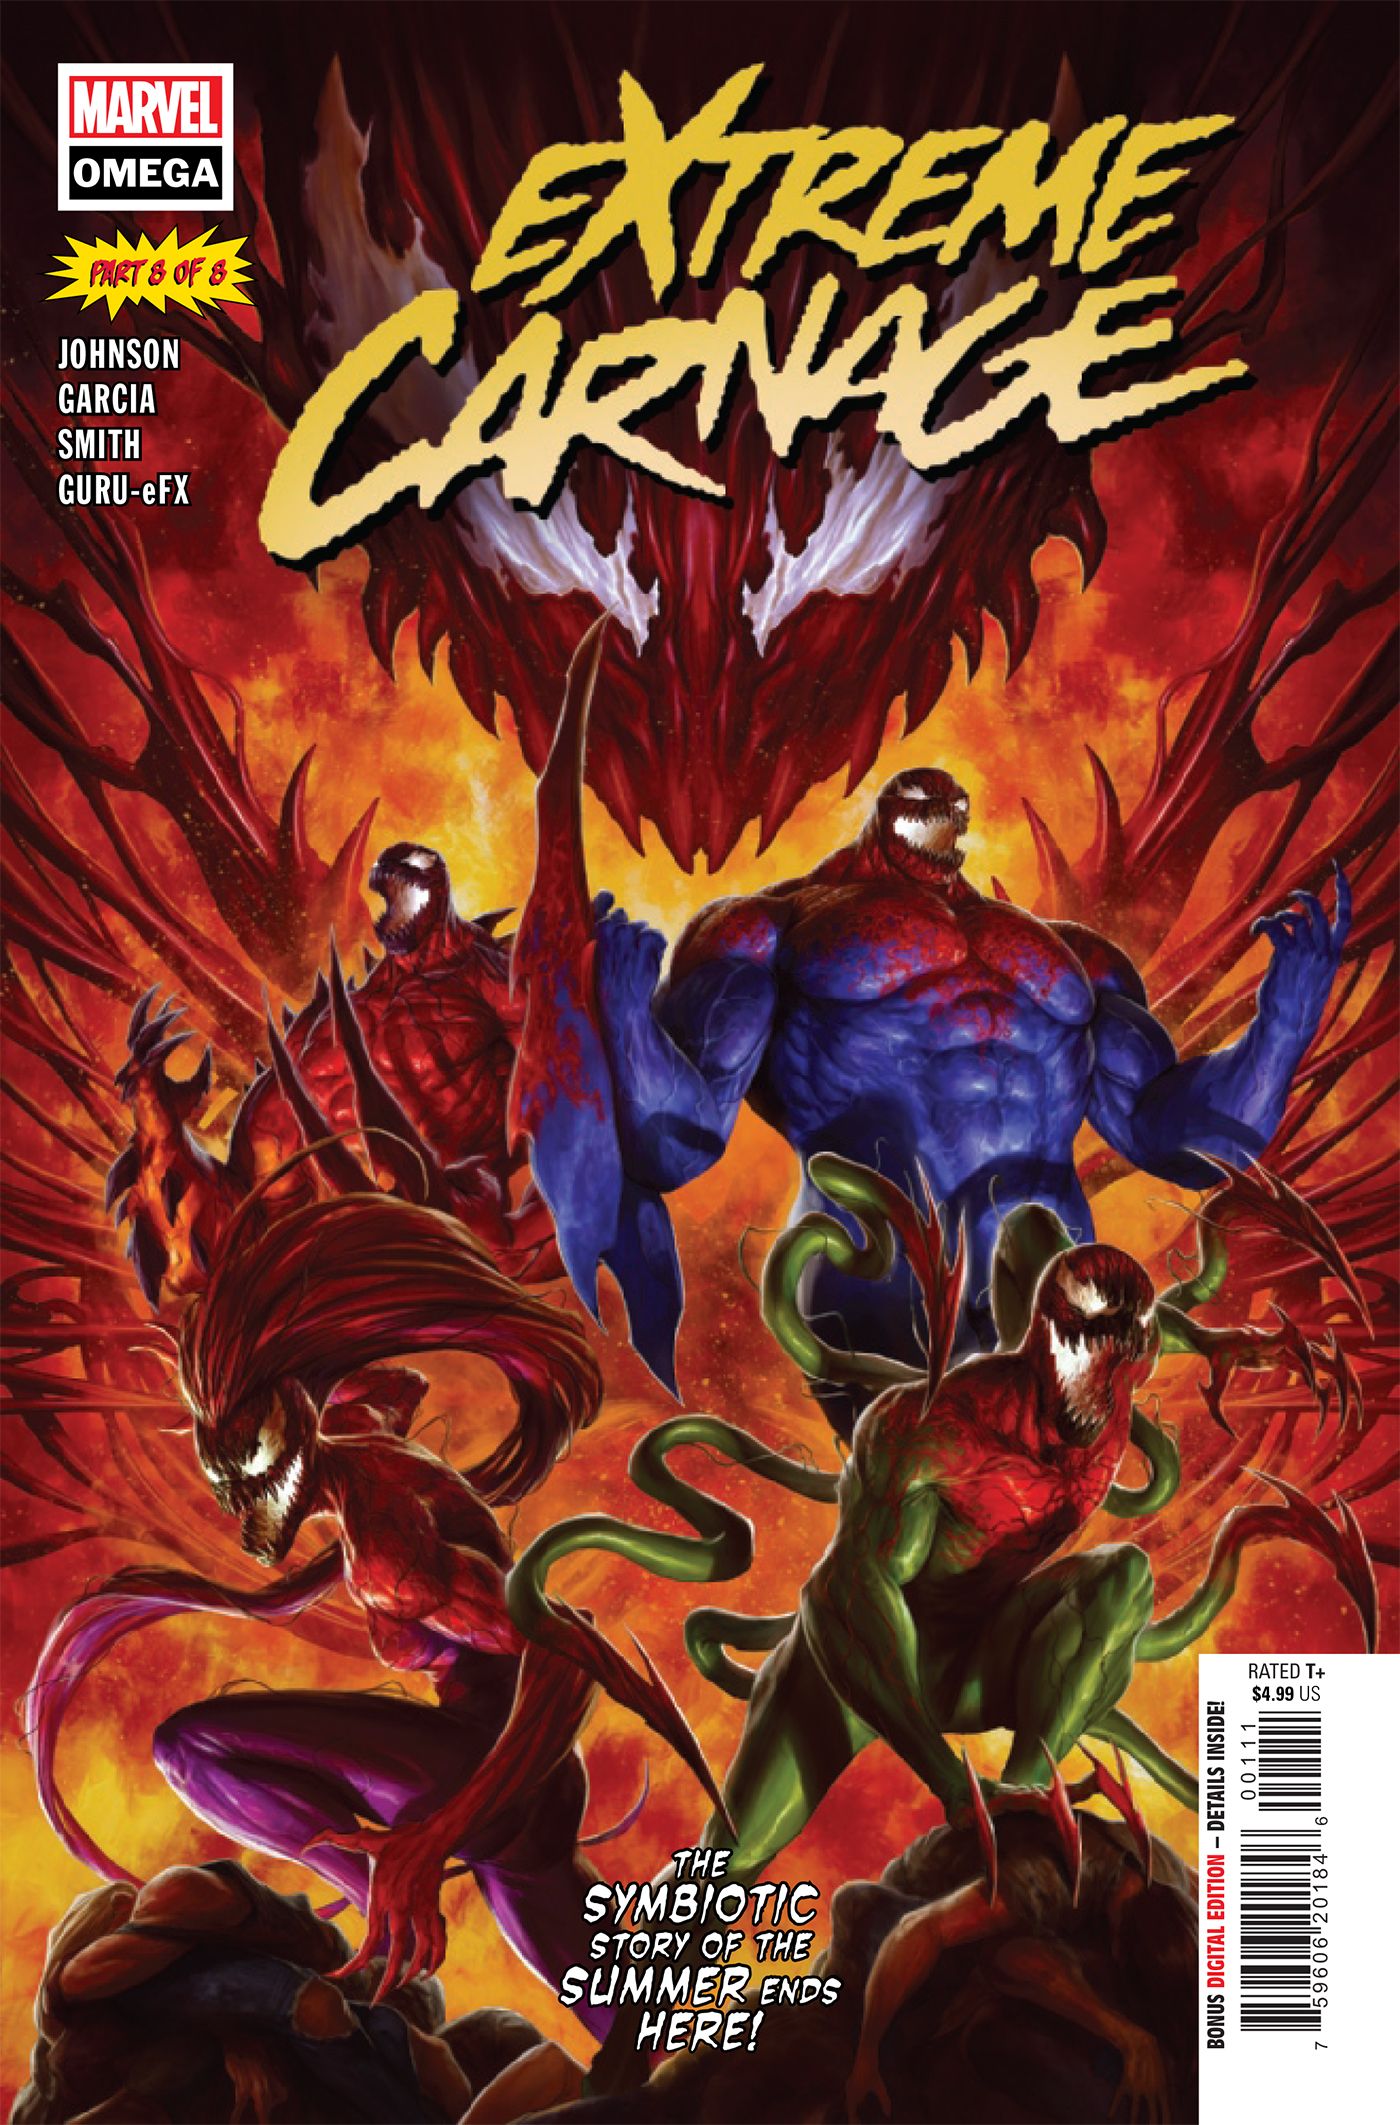 Extreme Carnage Omega #1 cover